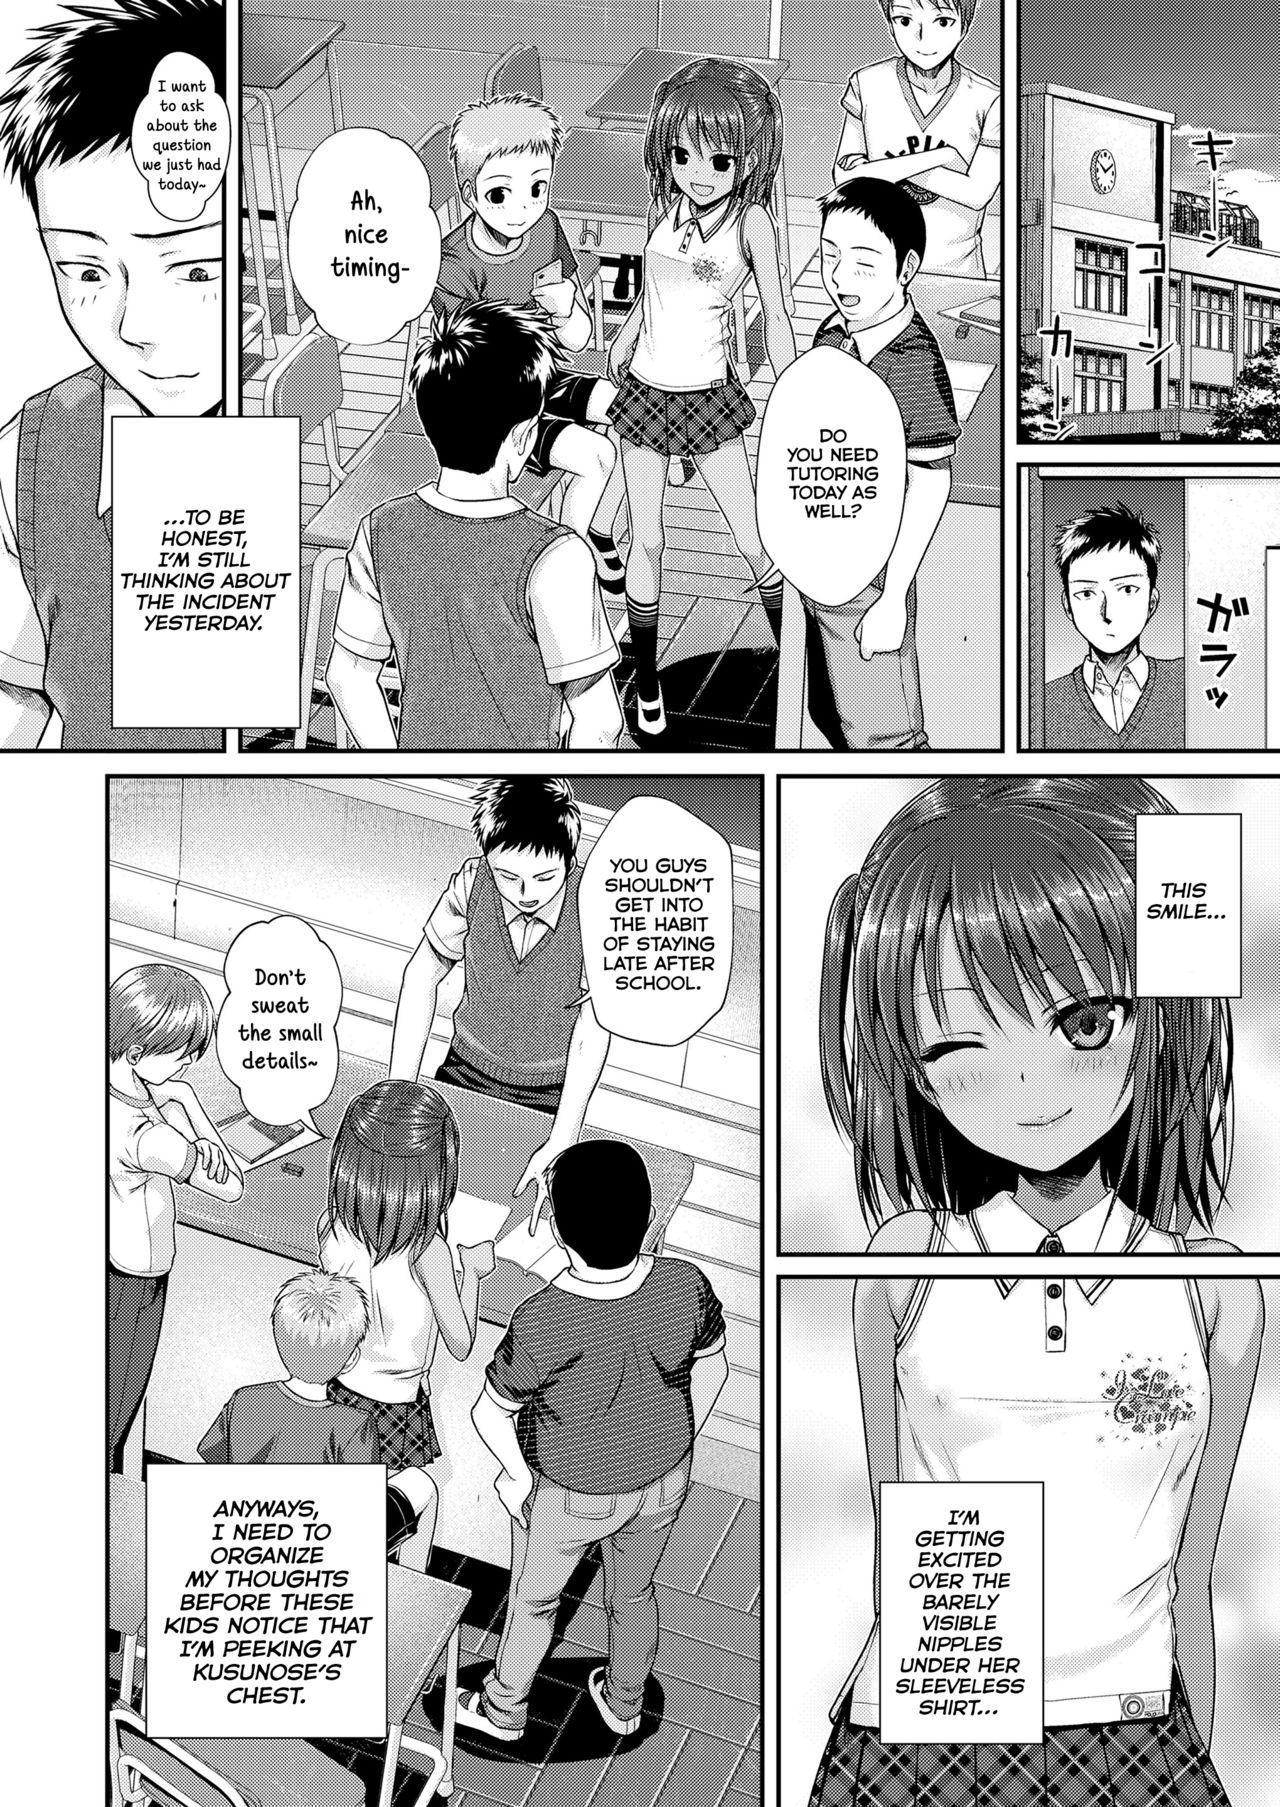 Hogtied Houkago wa Minna de | Together With Everyone After School Internal - Page 8